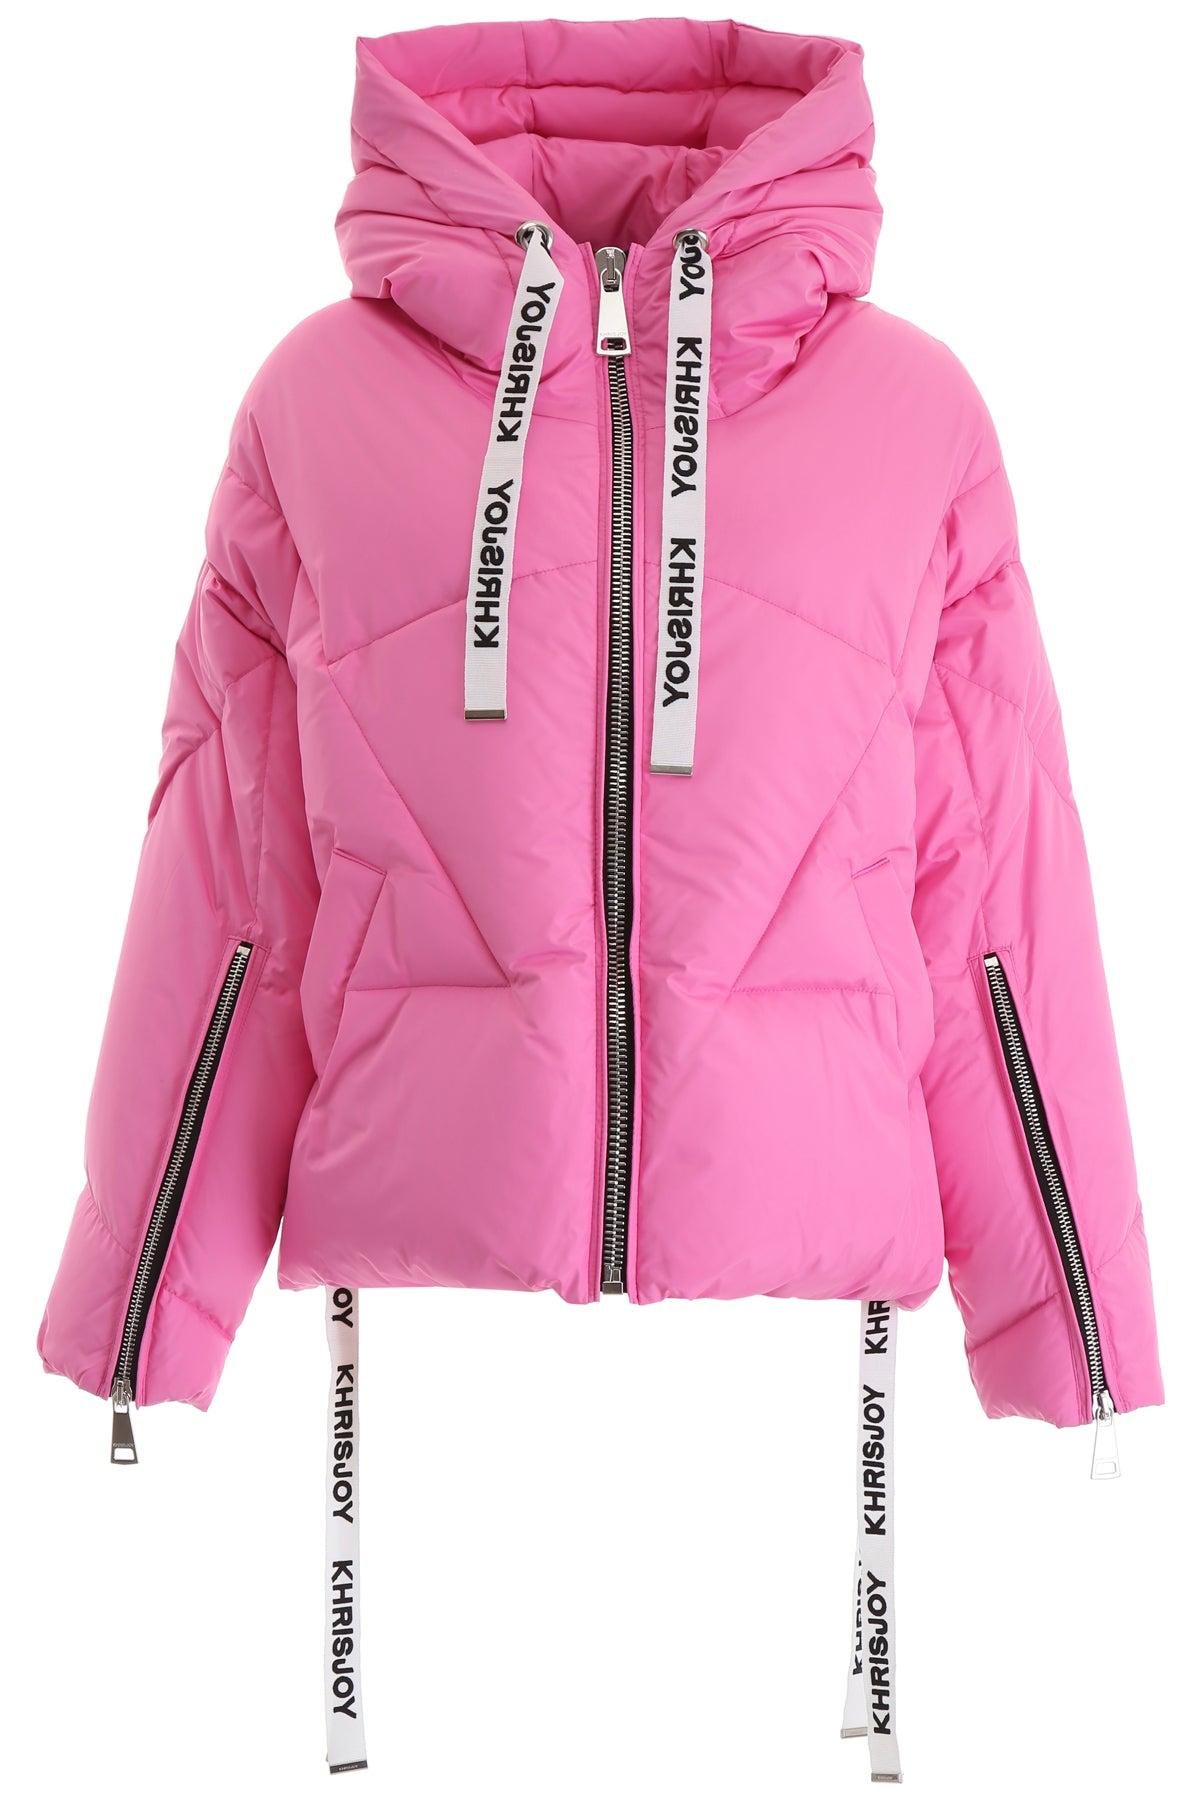 Khrisjoy Synthetic Khris Puffer Jacket in Red,Fuchsia (Pink) - Lyst